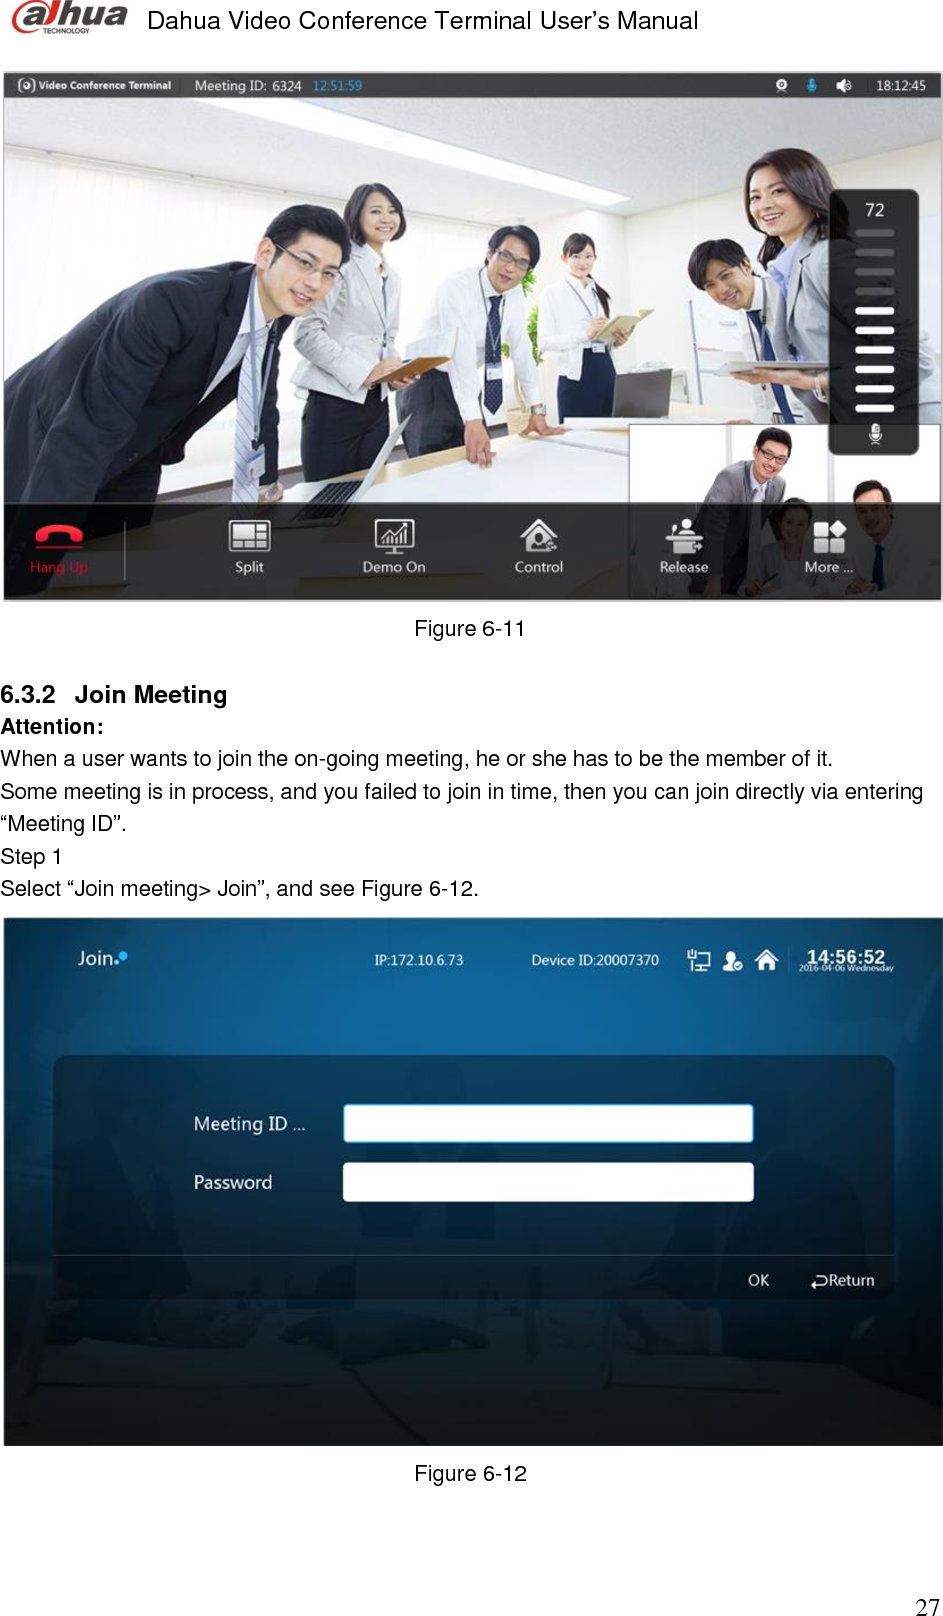  Dahua Video Conference Terminal User’s Manual                                                                              27  Figure 6-11  6.3.2  Join Meeting  Attention: When a user wants to join the on-going meeting, he or she has to be the member of it.  Some meeting is in process, and you failed to join in time, then you can join directly via entering “Meeting ID”.  Step 1  Select “Join meeting&gt; Join”, and see Figure 6-12.   Figure 6-12   